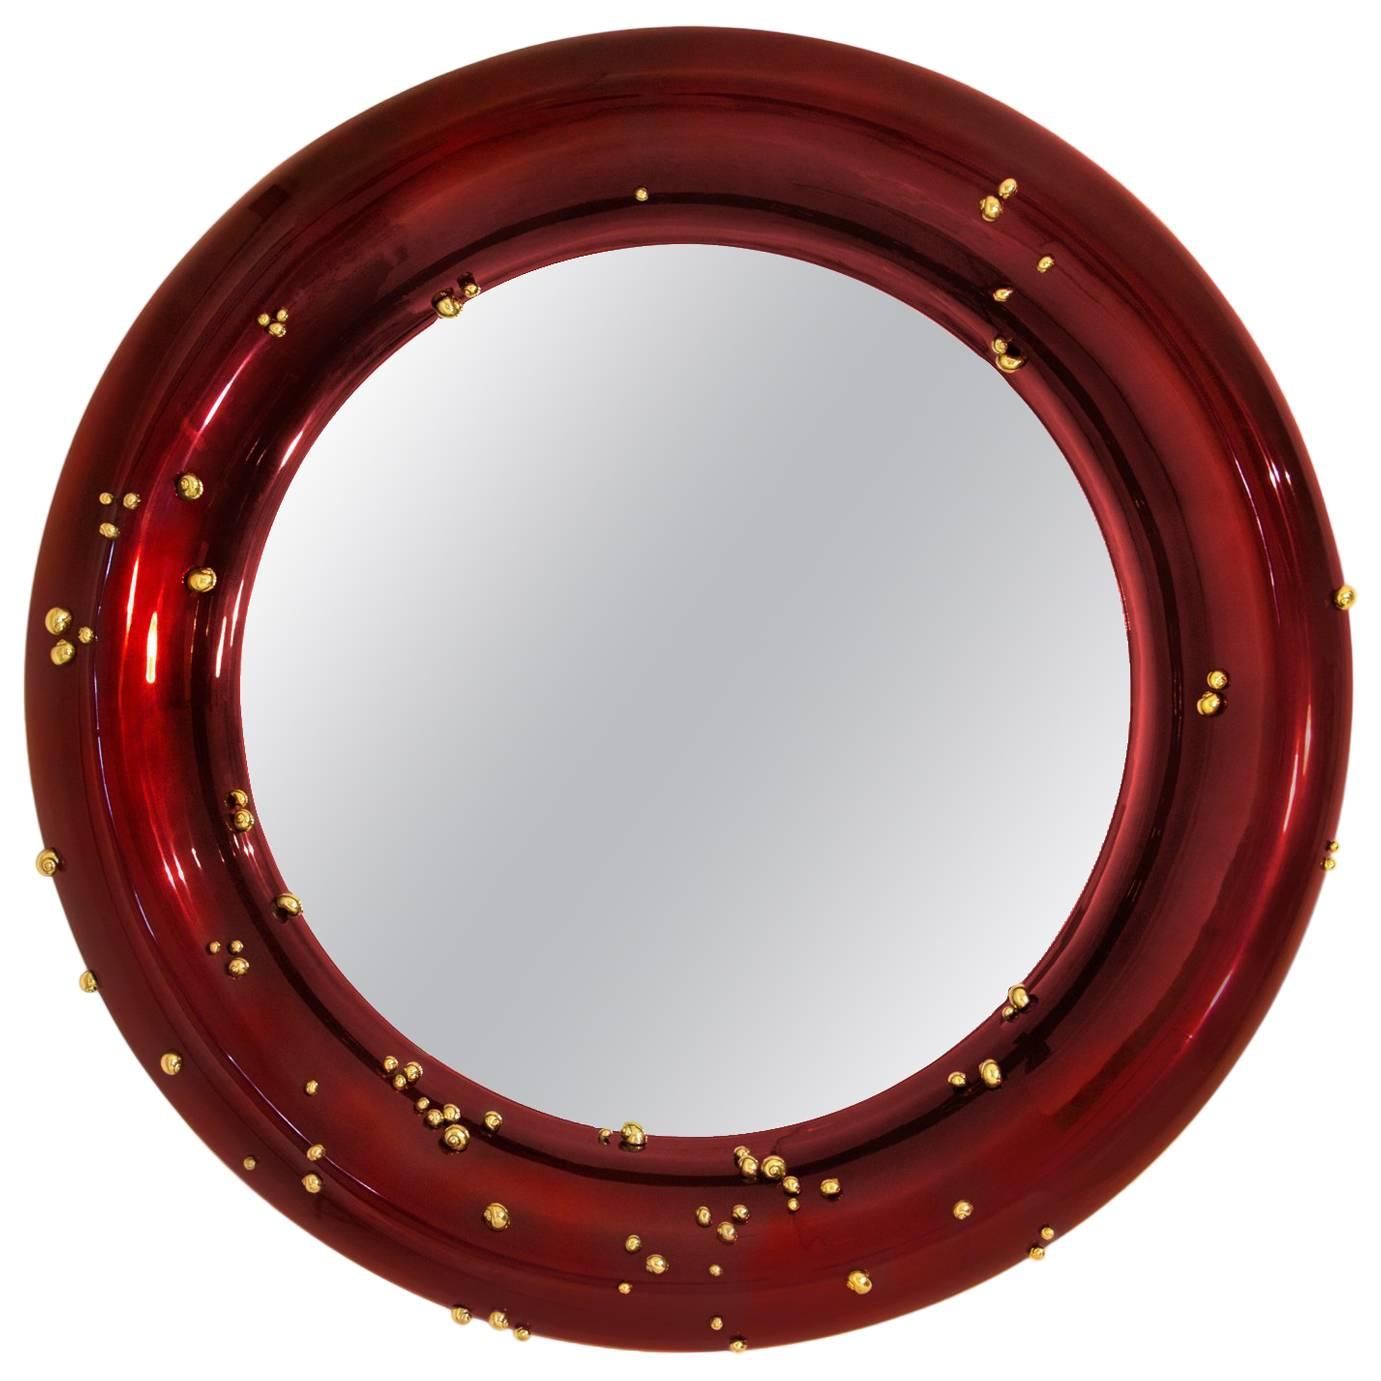 Red Mirror with Black and Red Glossy Varnished and Golded Snails